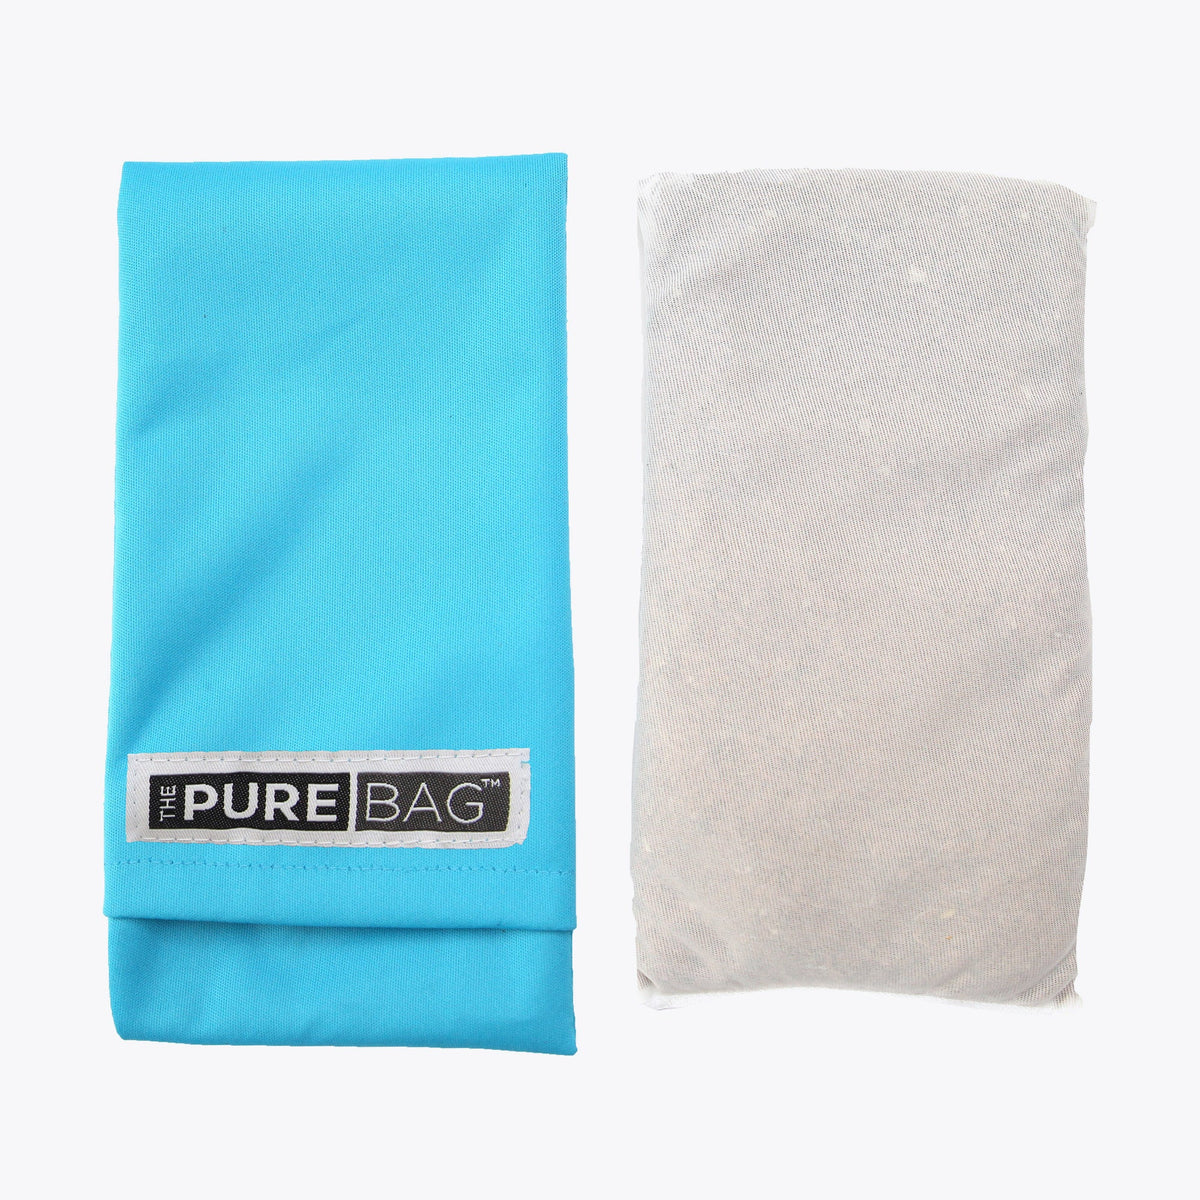 Filling of the The Pure Bag Hypo-Microbial Eye Pillow